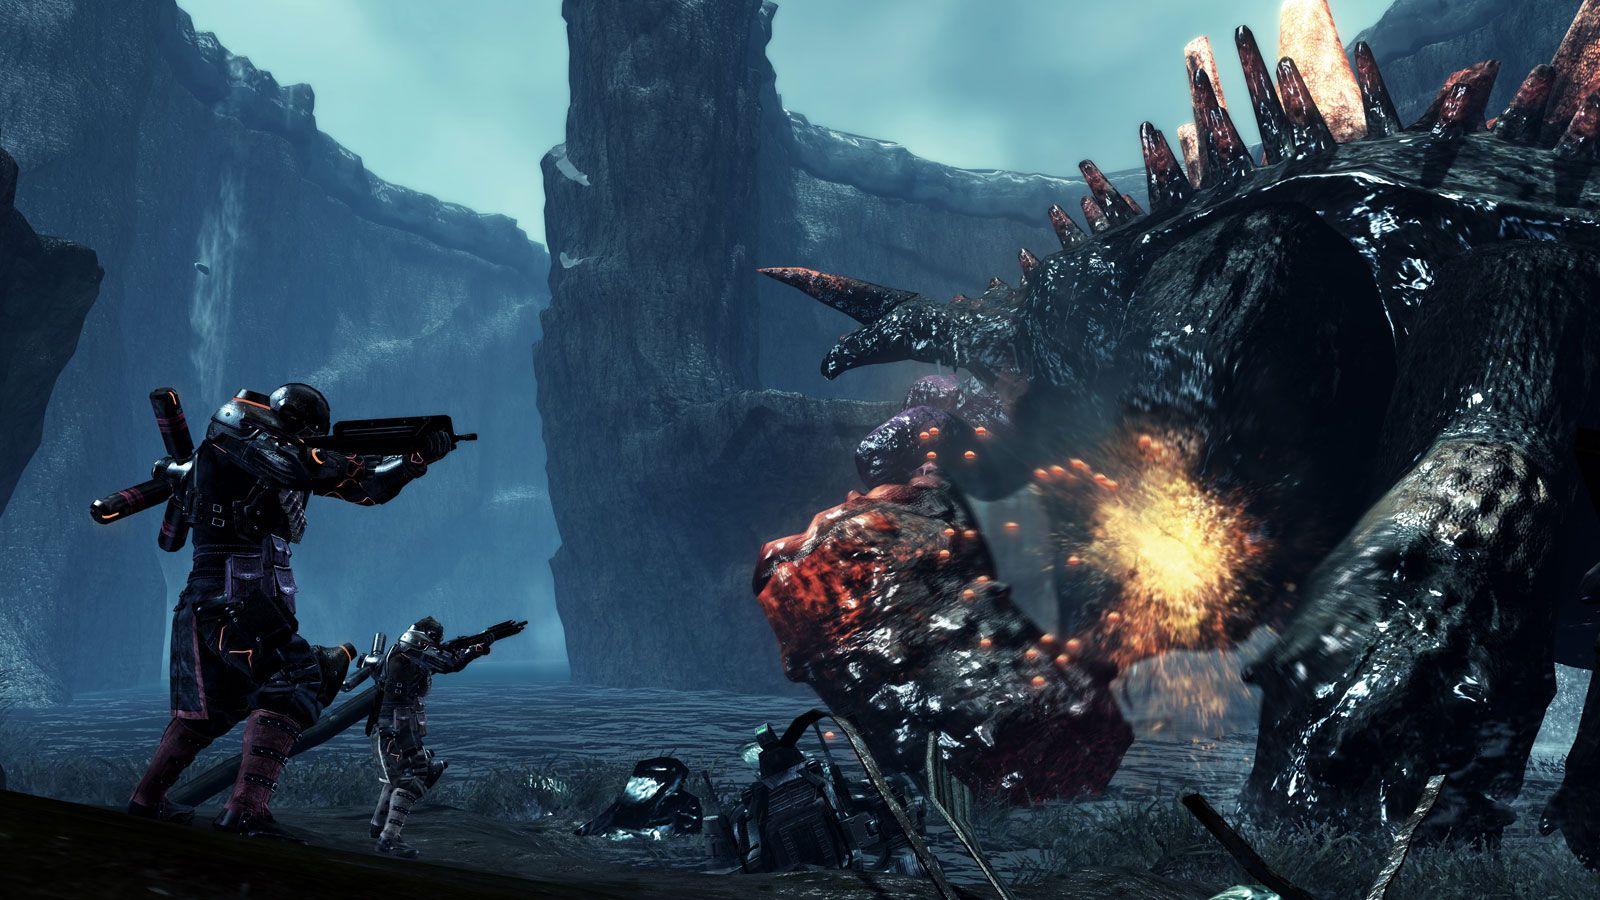 lost planet 2 pc update download